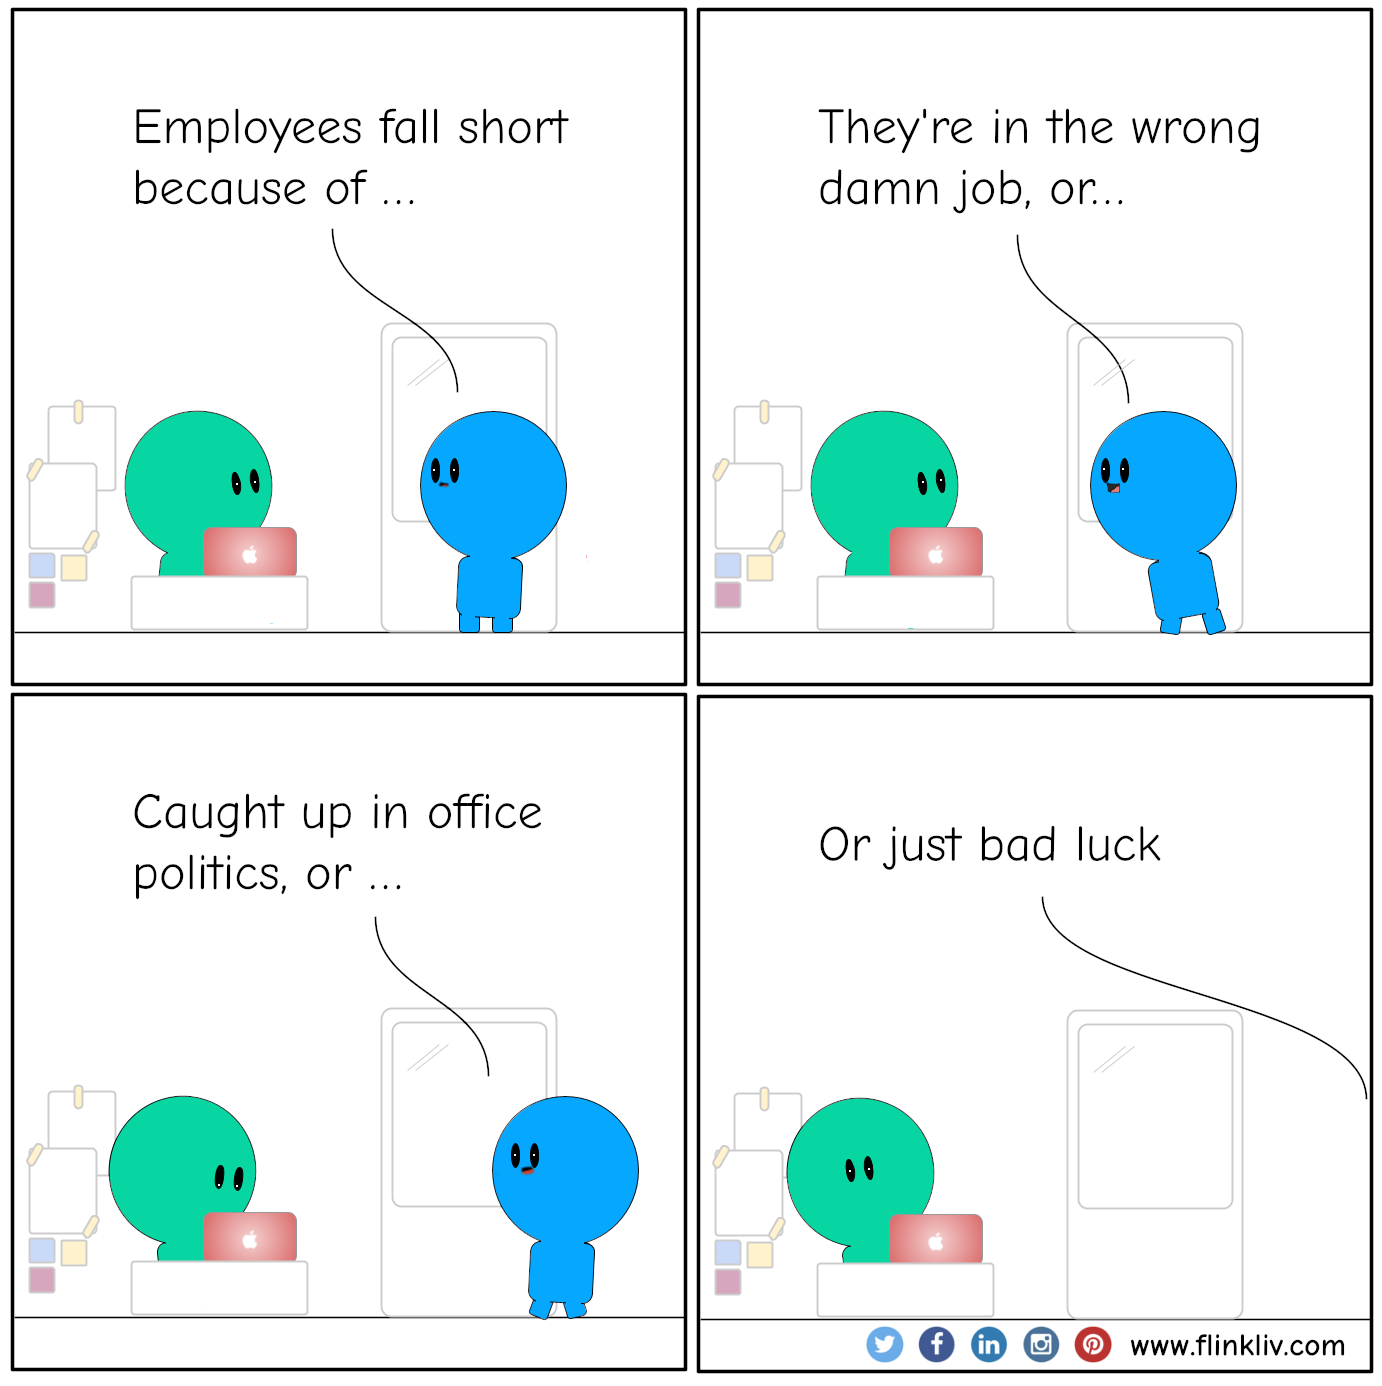 Conversation between A and B about reasons talented employees don't succeed. B: Employees fall short 'cause: B: They're in the wrong damn job B: Caught up in office politics B: or just bad luck. By flinkliv.com